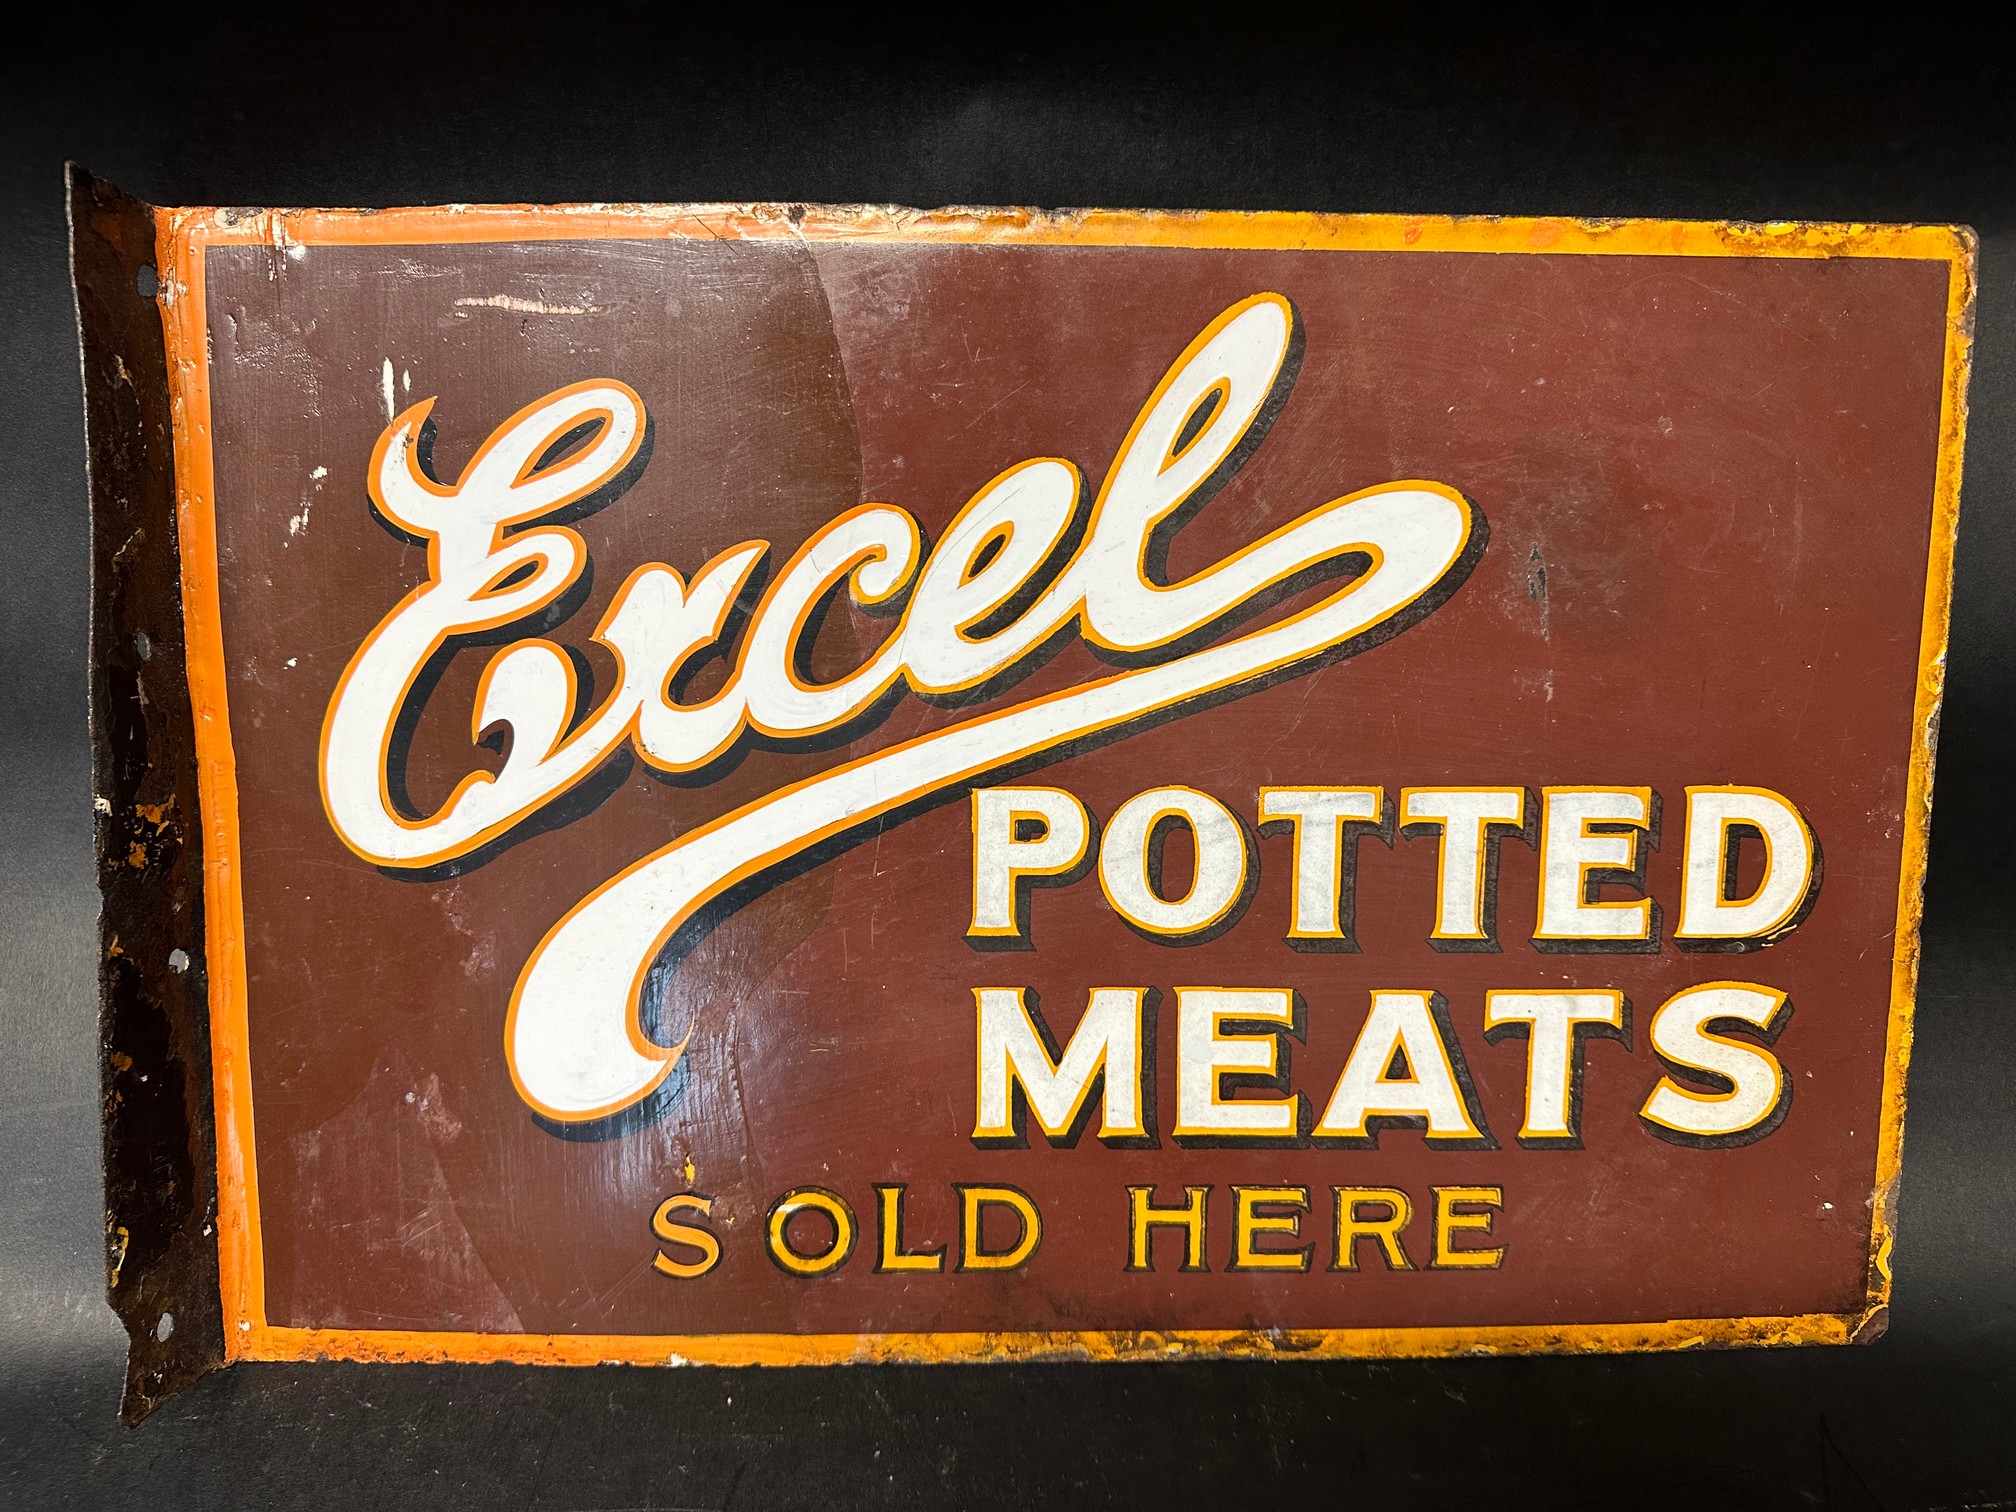 An Excel Potted Meats 'Sold Here' double sided enamel advertising sign with hanging flange, - Image 5 of 8